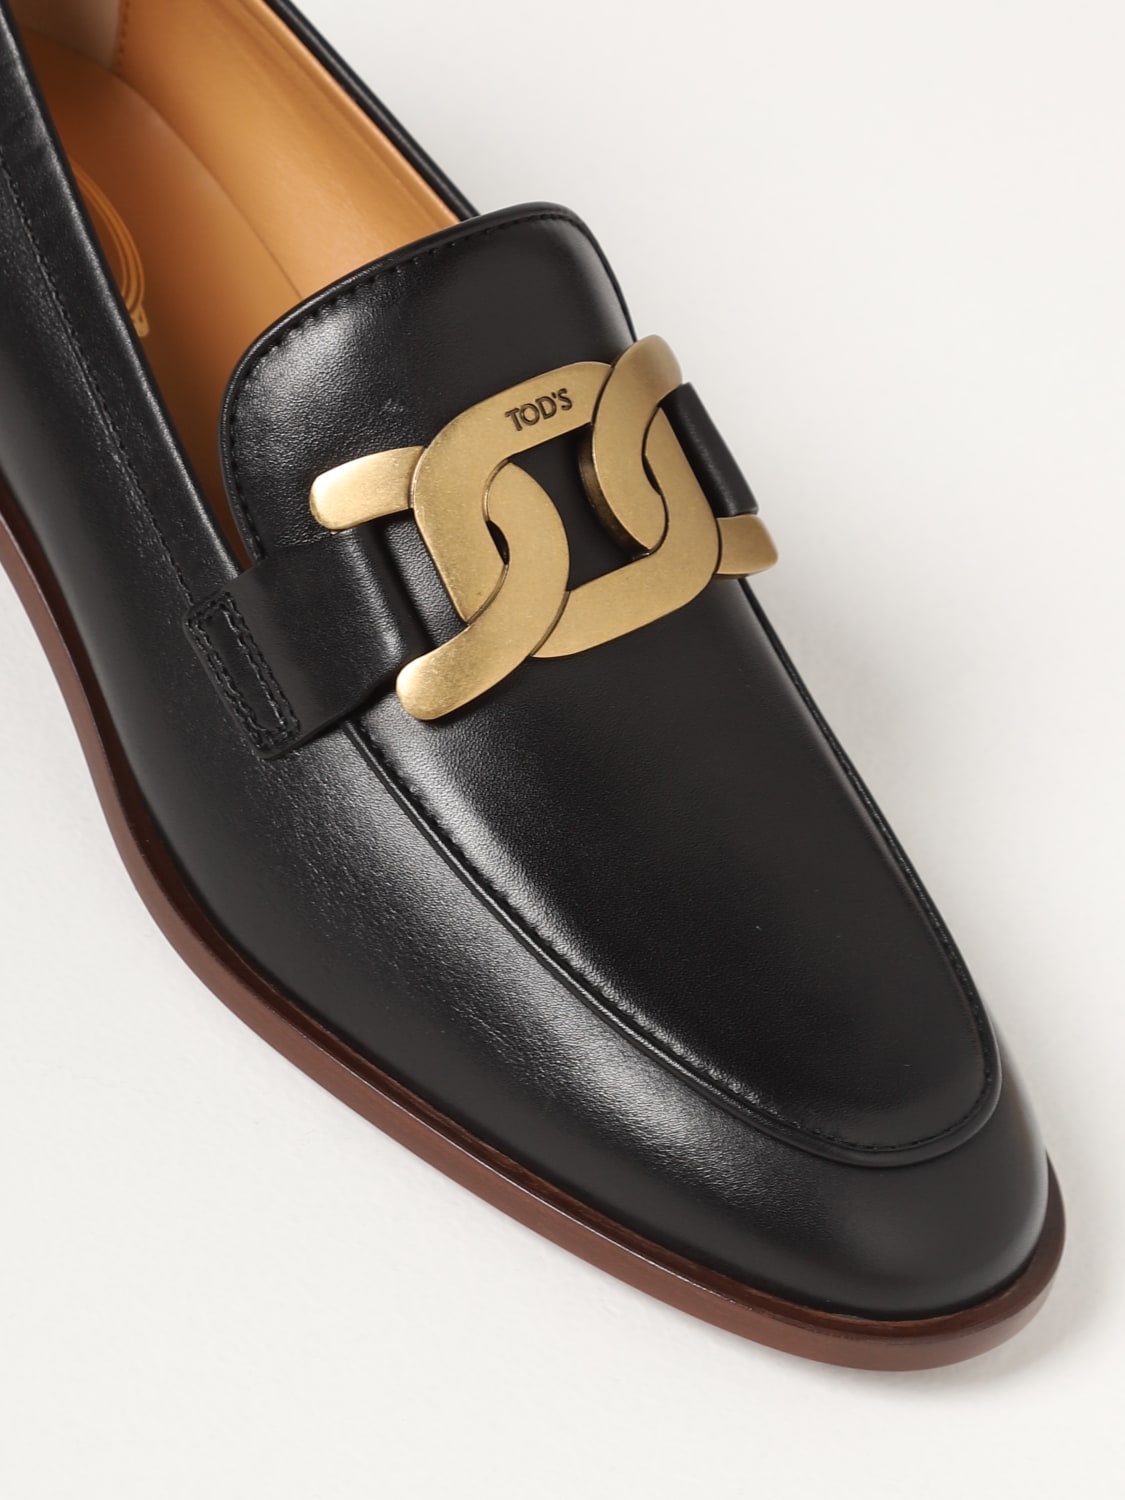 loafers woman Black | Tod's loafers XXW28K0FR00GOC online on GIGLIO.COM